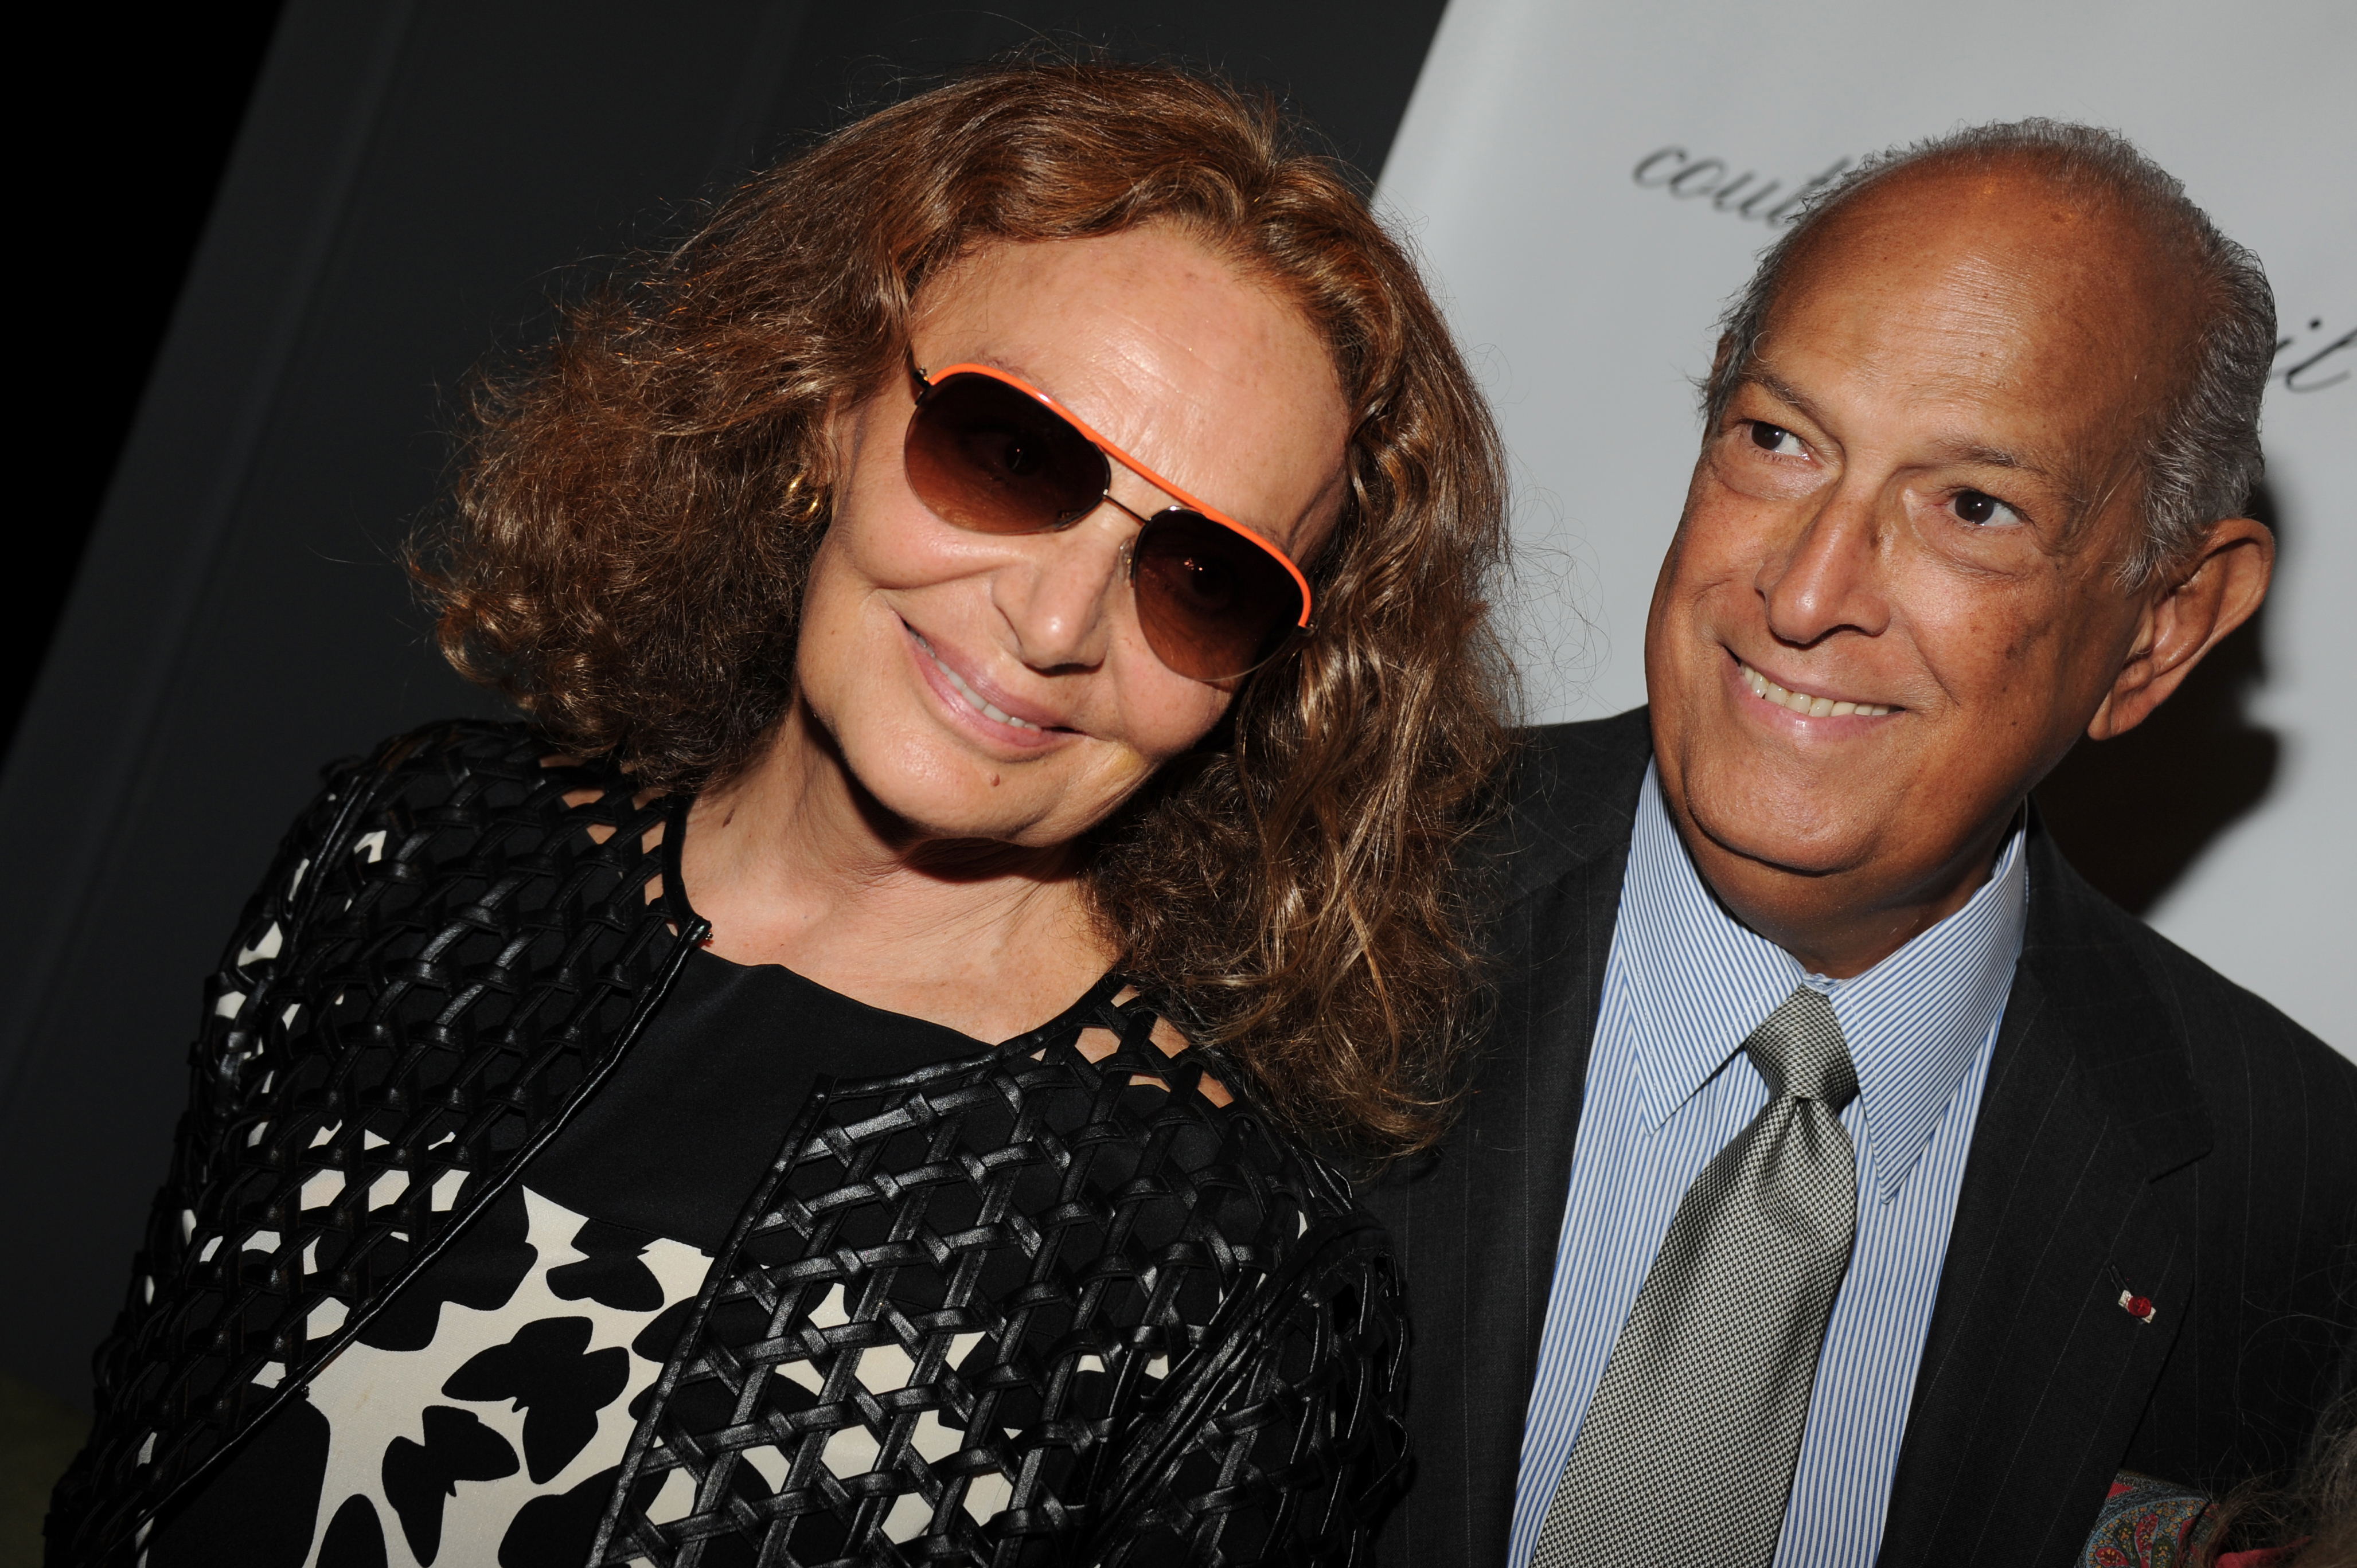 From Left: Diane von Furstenberg and Oscar de la Renta attend a function at Lincoln Center in new York City on Sept. 5, 2012.